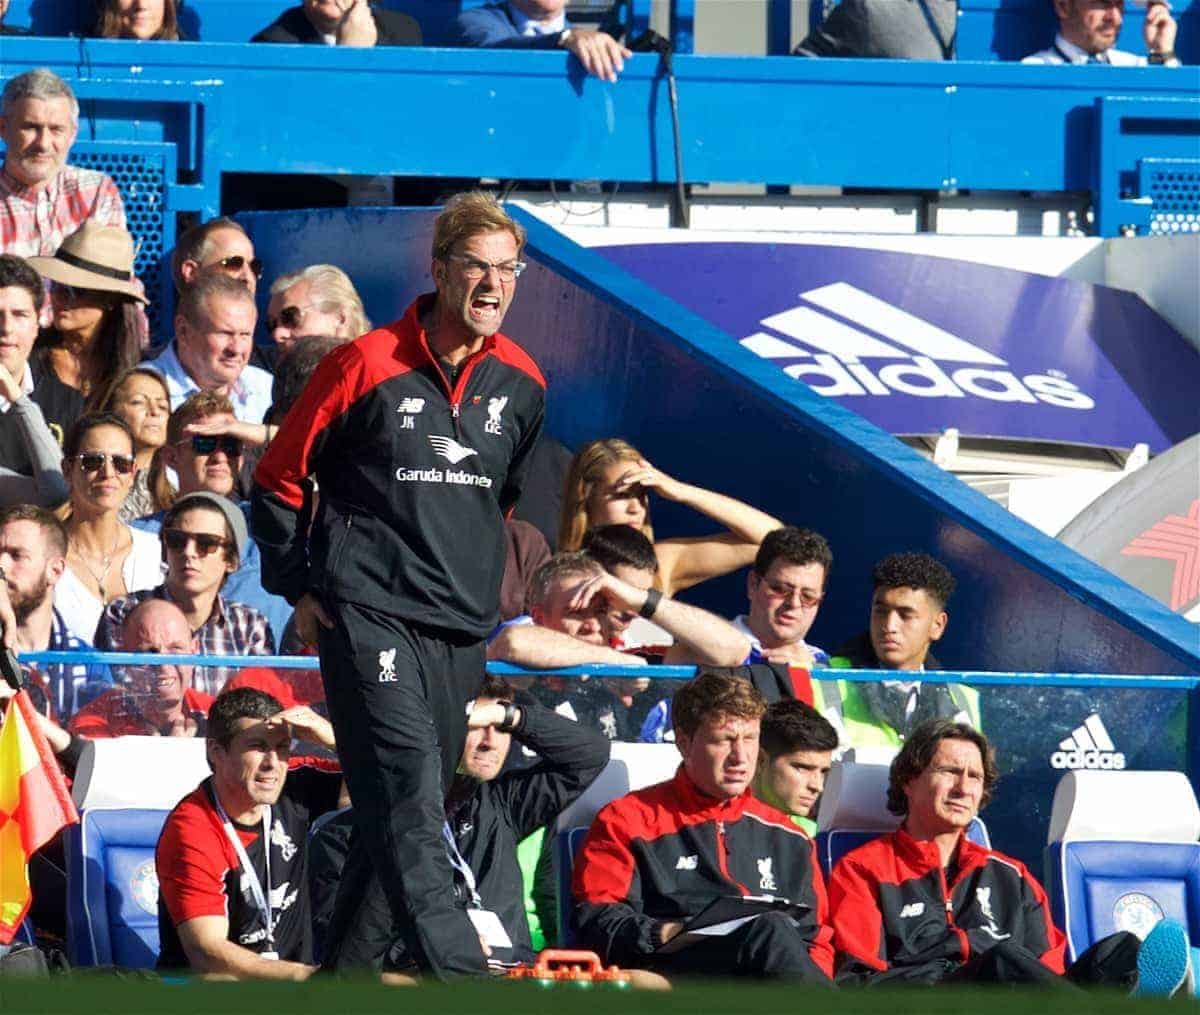 LONDON, ENGLAND - Saturday, October 31, 2015: Liverpool's manager Jürgen Klopp during the Premier League match against Chelsea at Stamford Bridge. (Pic by David Rawcliffe/Propaganda)